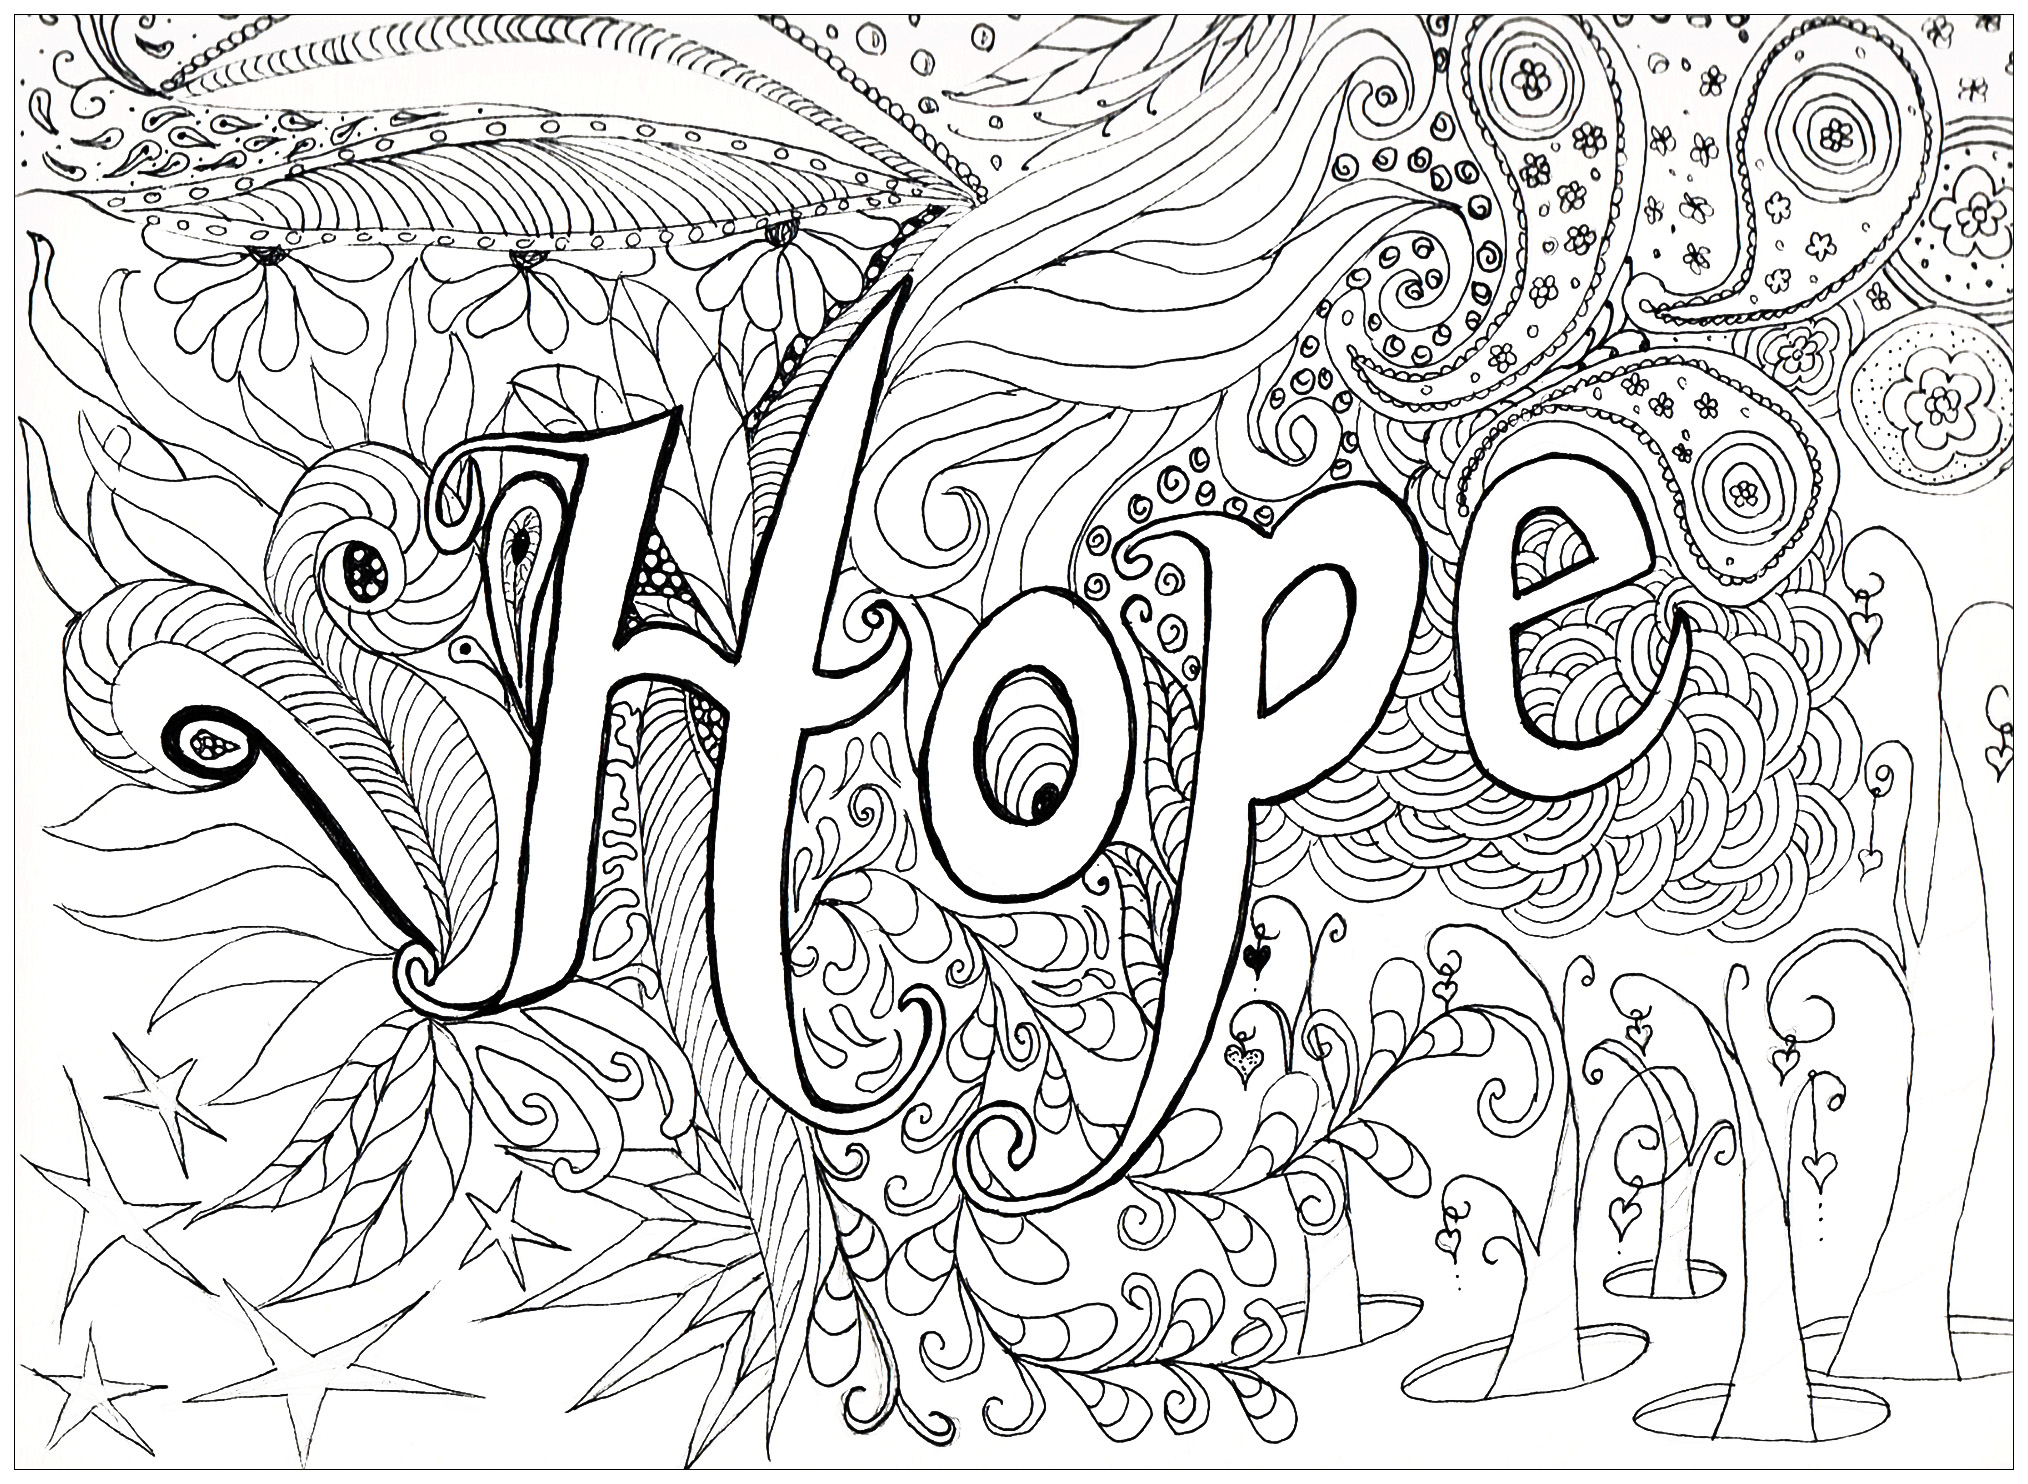 Hope - Image with : Hope